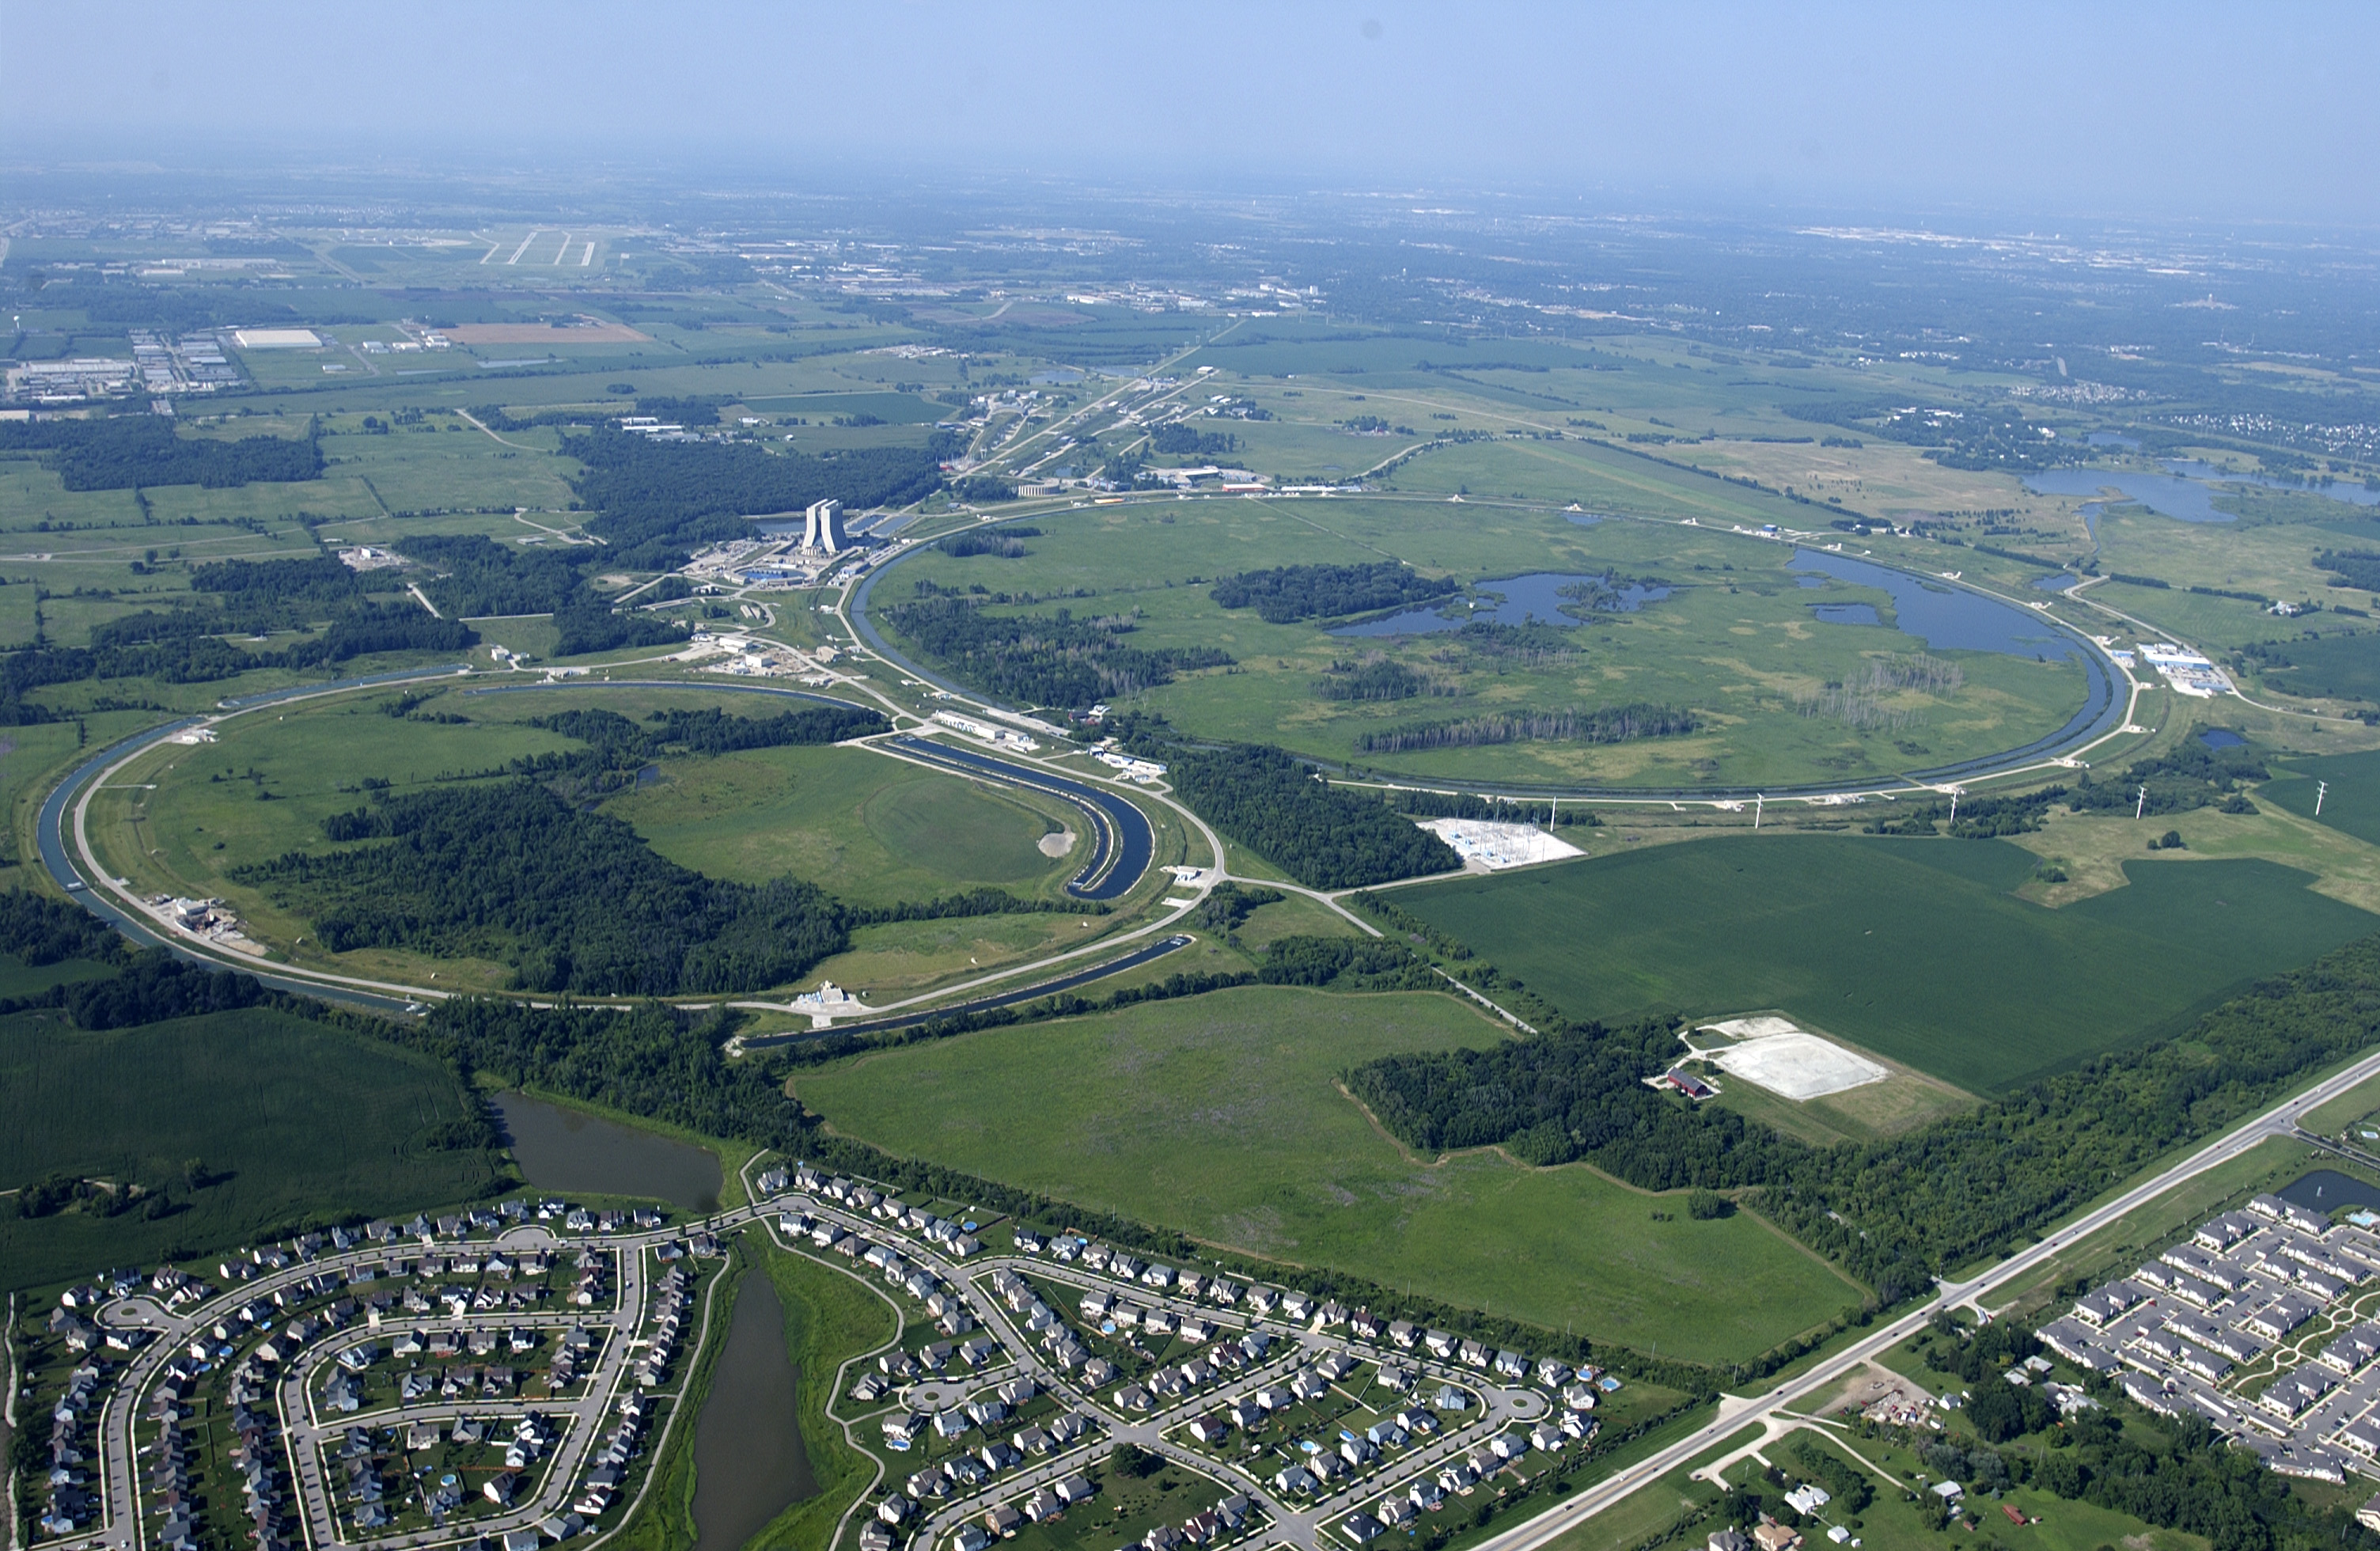 Aerial view of Fermilab, a national physics laboratory in Aurora, Illinois.